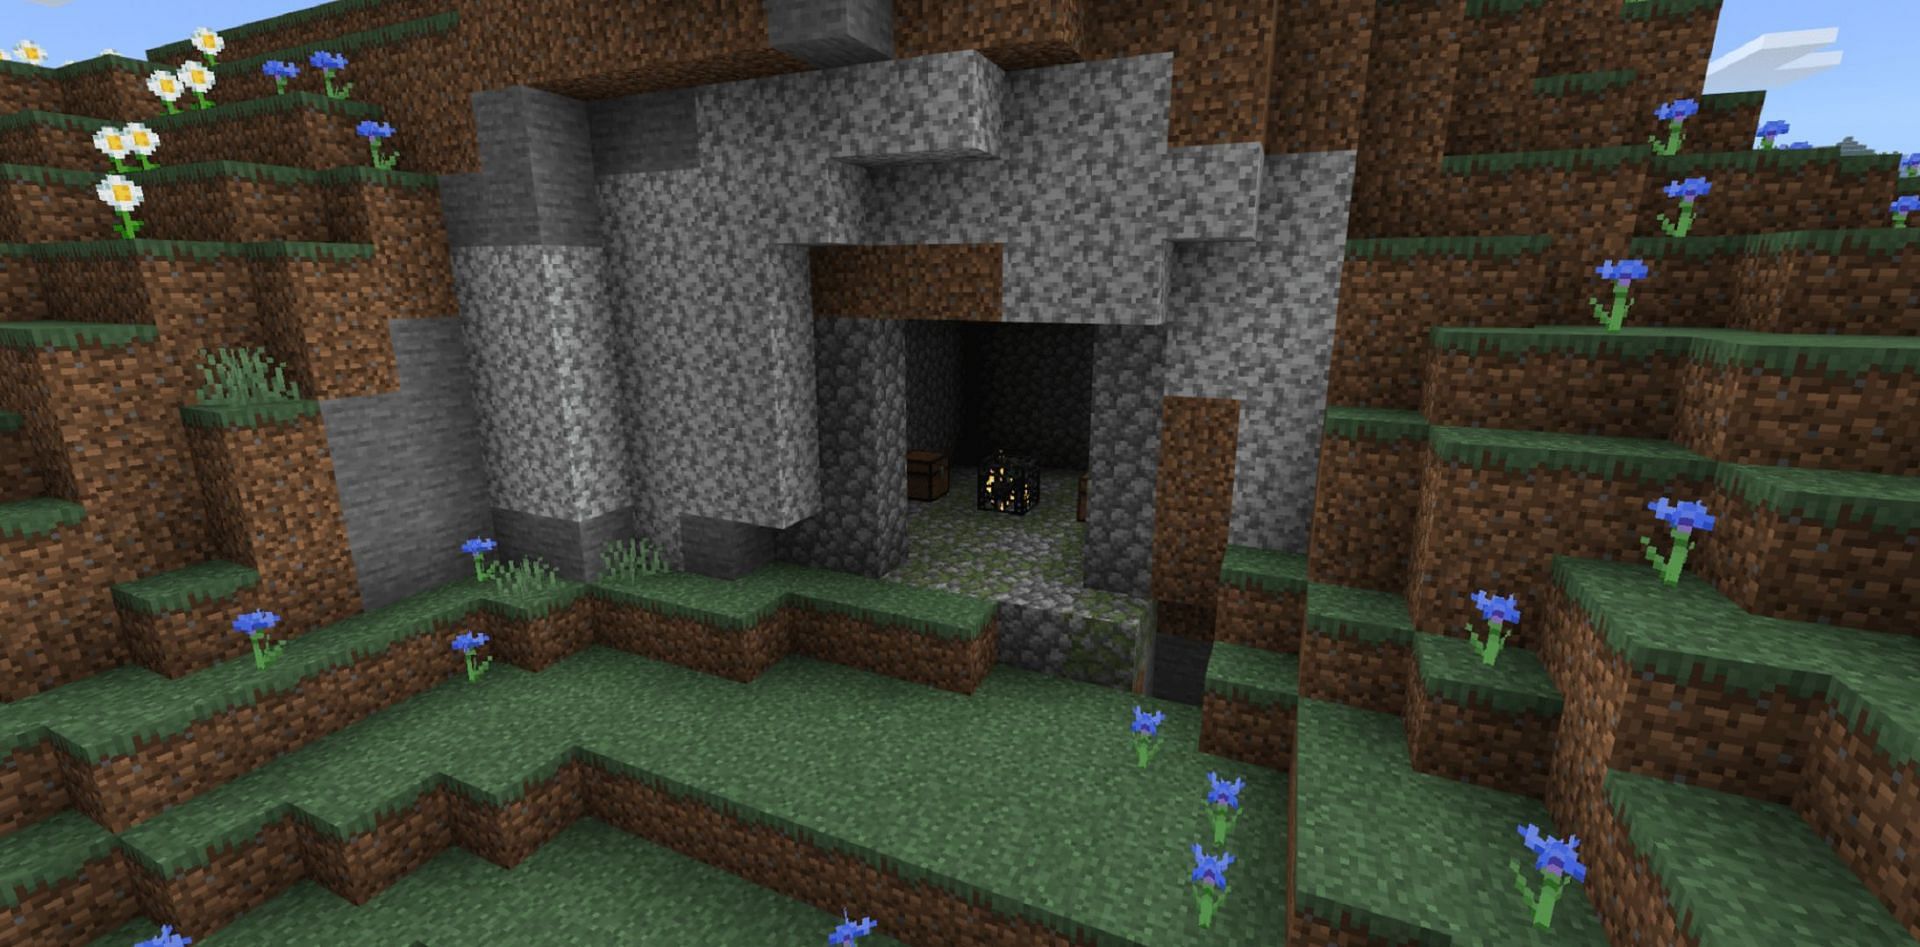 This spawner block almost looks like it was placed in a player-made location (Image via u/Katkalis/Reddit)